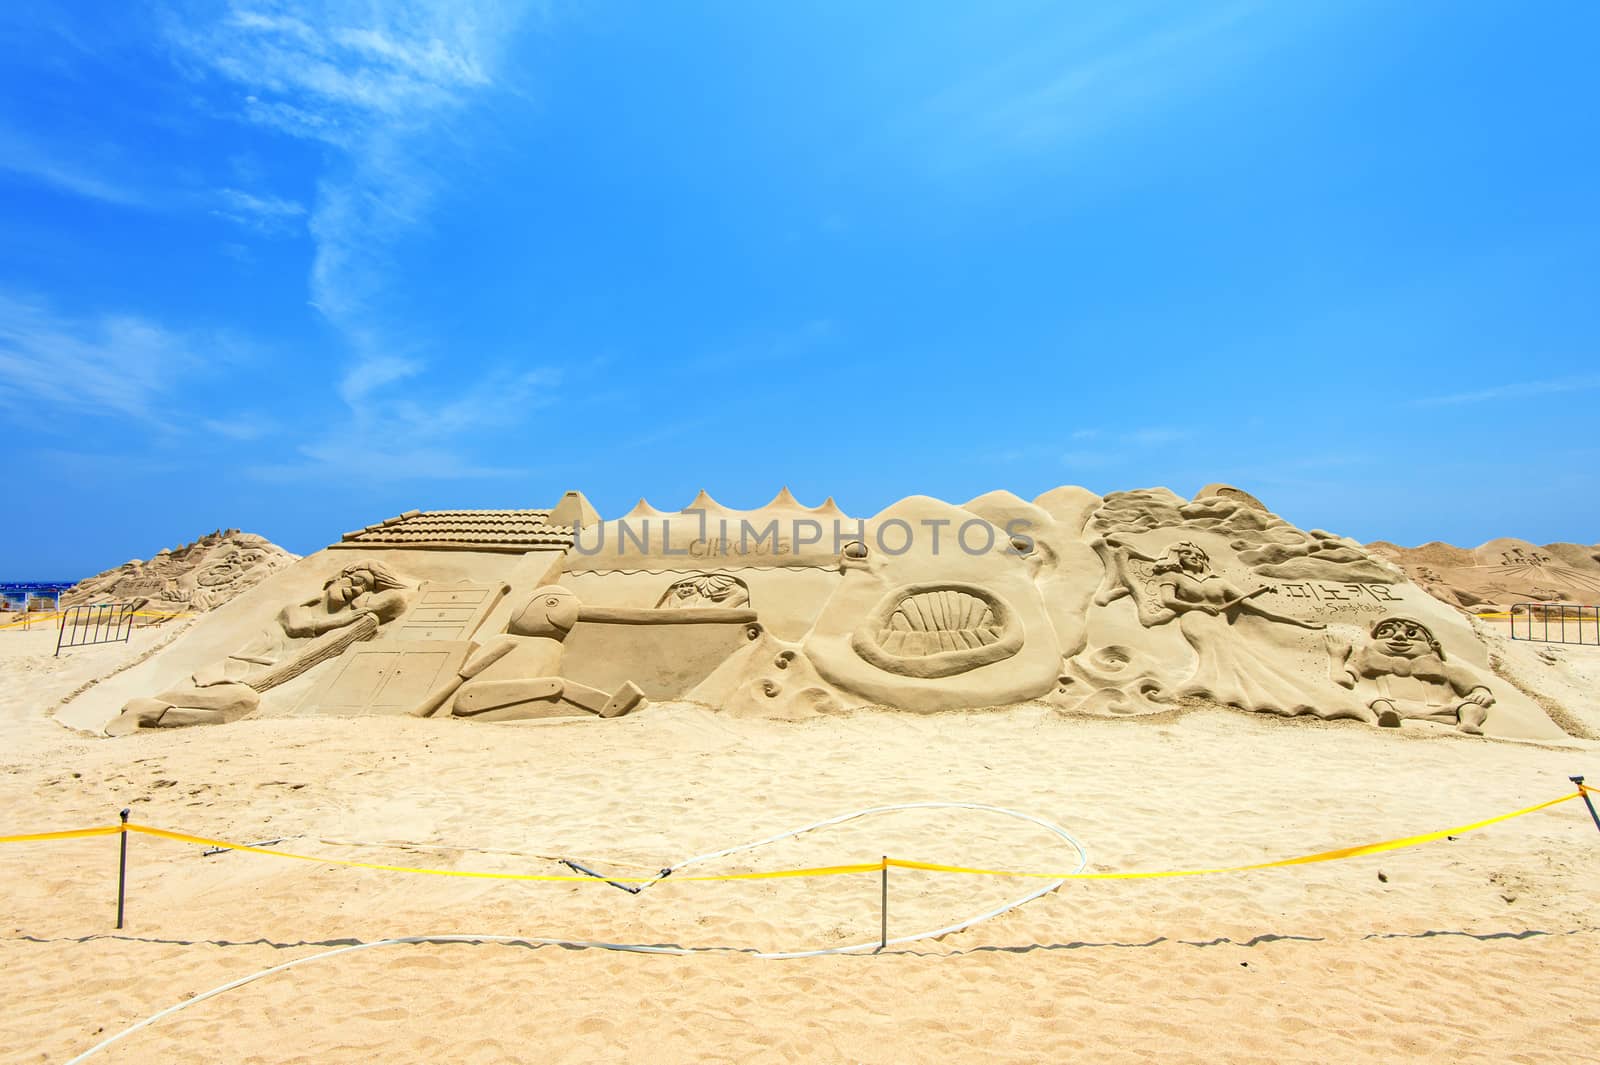 Sand sculptures at the Busan Sand Festival. by gutarphotoghaphy